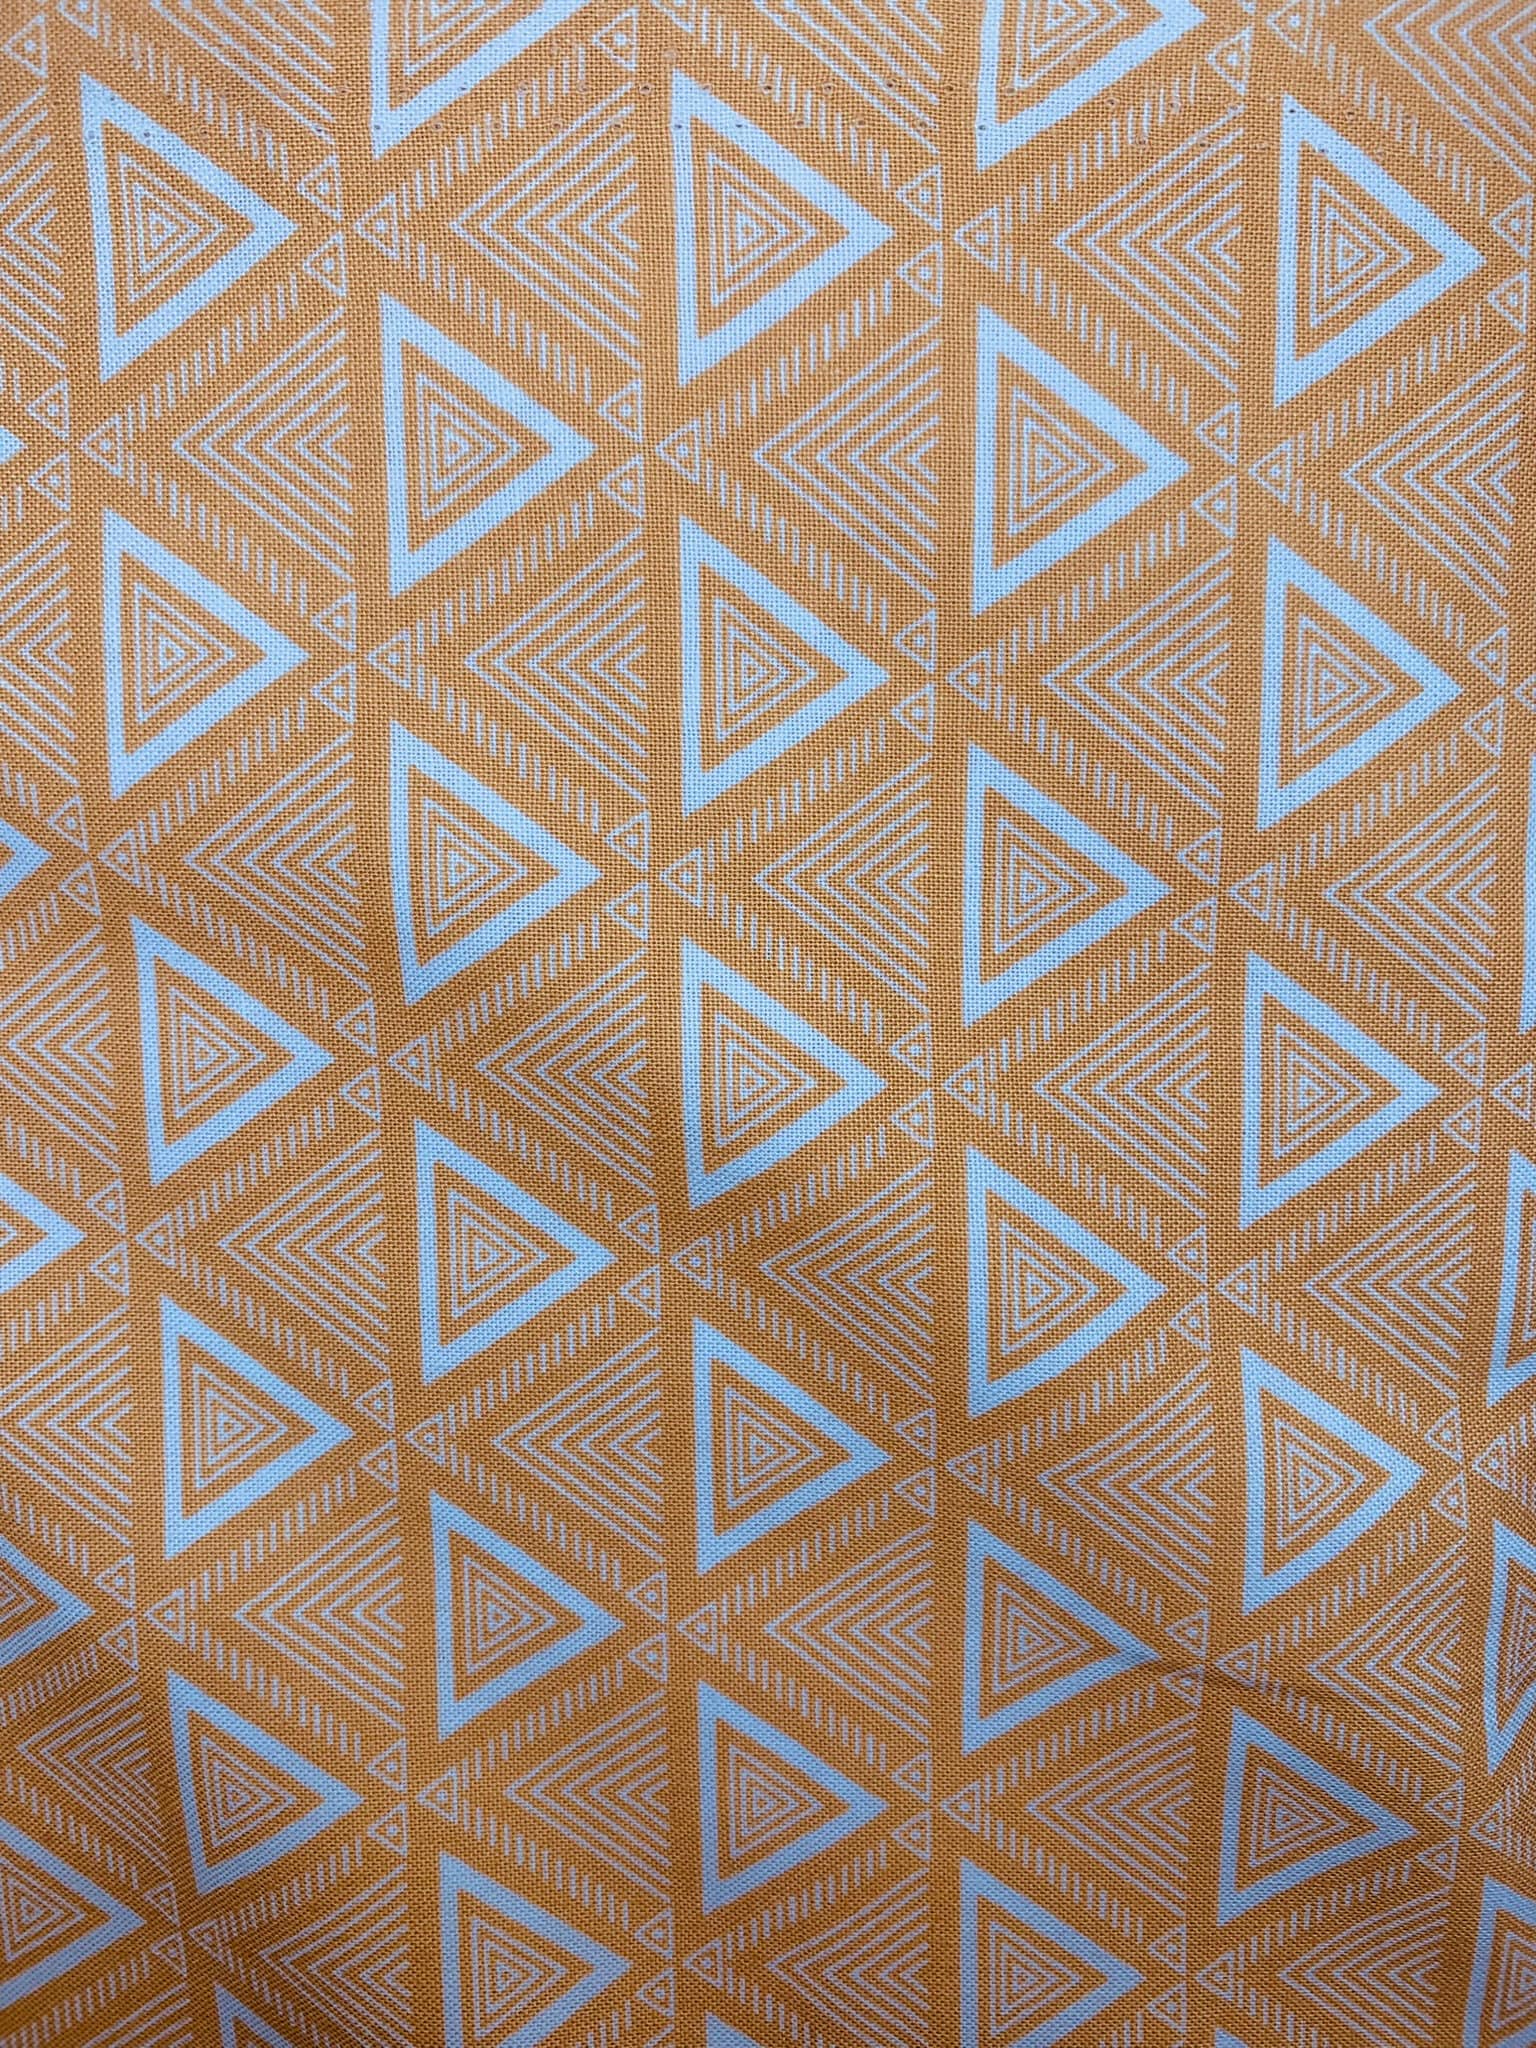 High Quality Quilting Fabric-- Hand Cut -Sold by the 1/2 Yard- Michael Miller Fabrics-100% Cotton Fabric. Color: Honey-Sold by the 1/2 Yard-